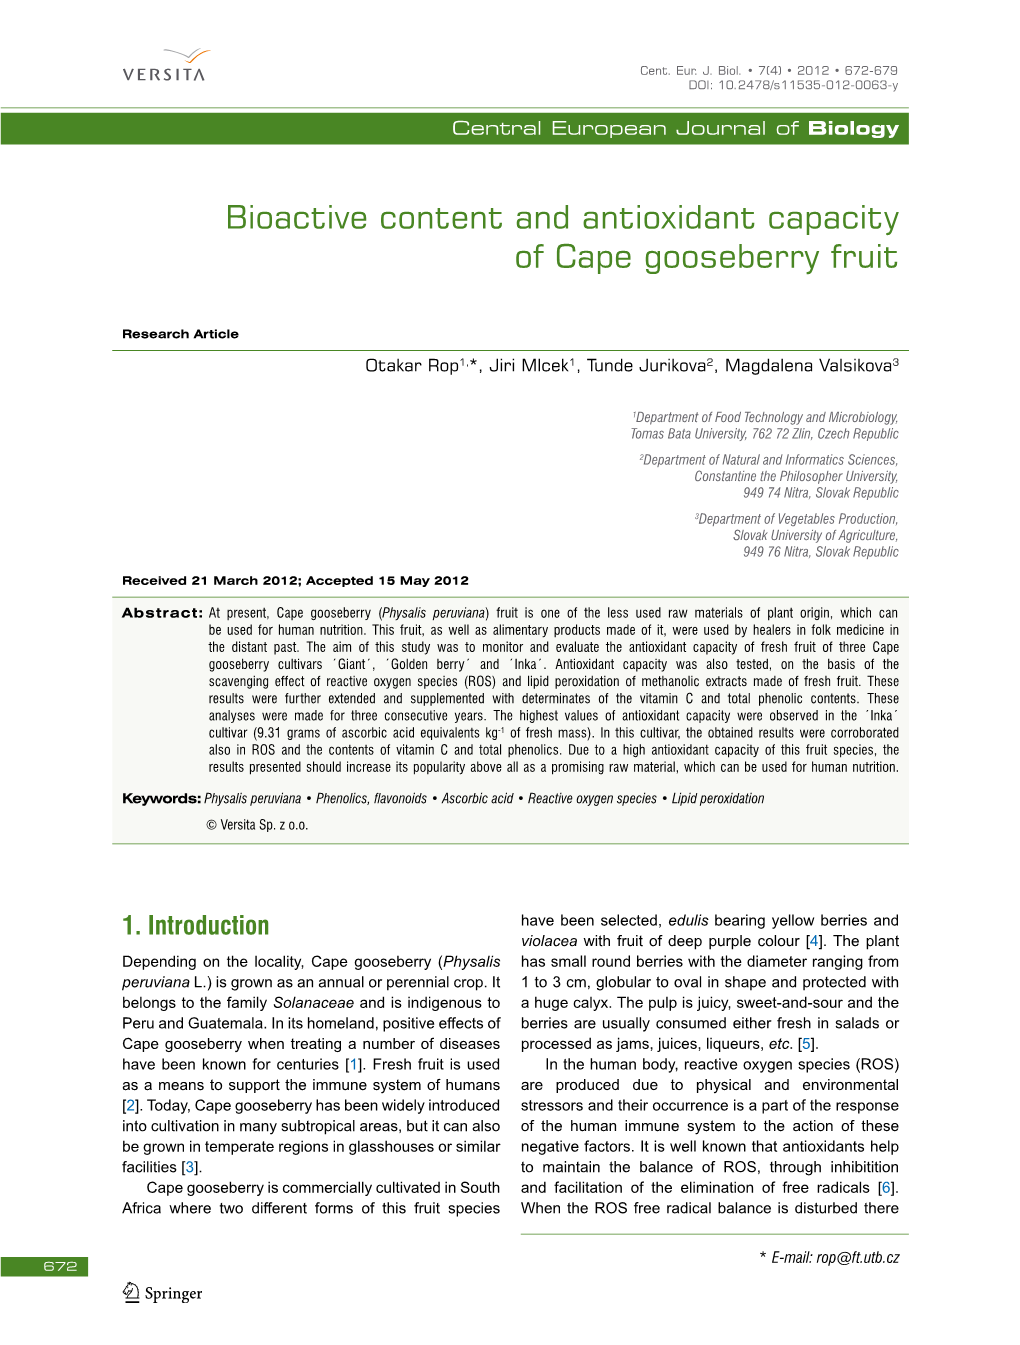 Bioactive Content and Antioxidant Capacity of Cape Gooseberry Fruit